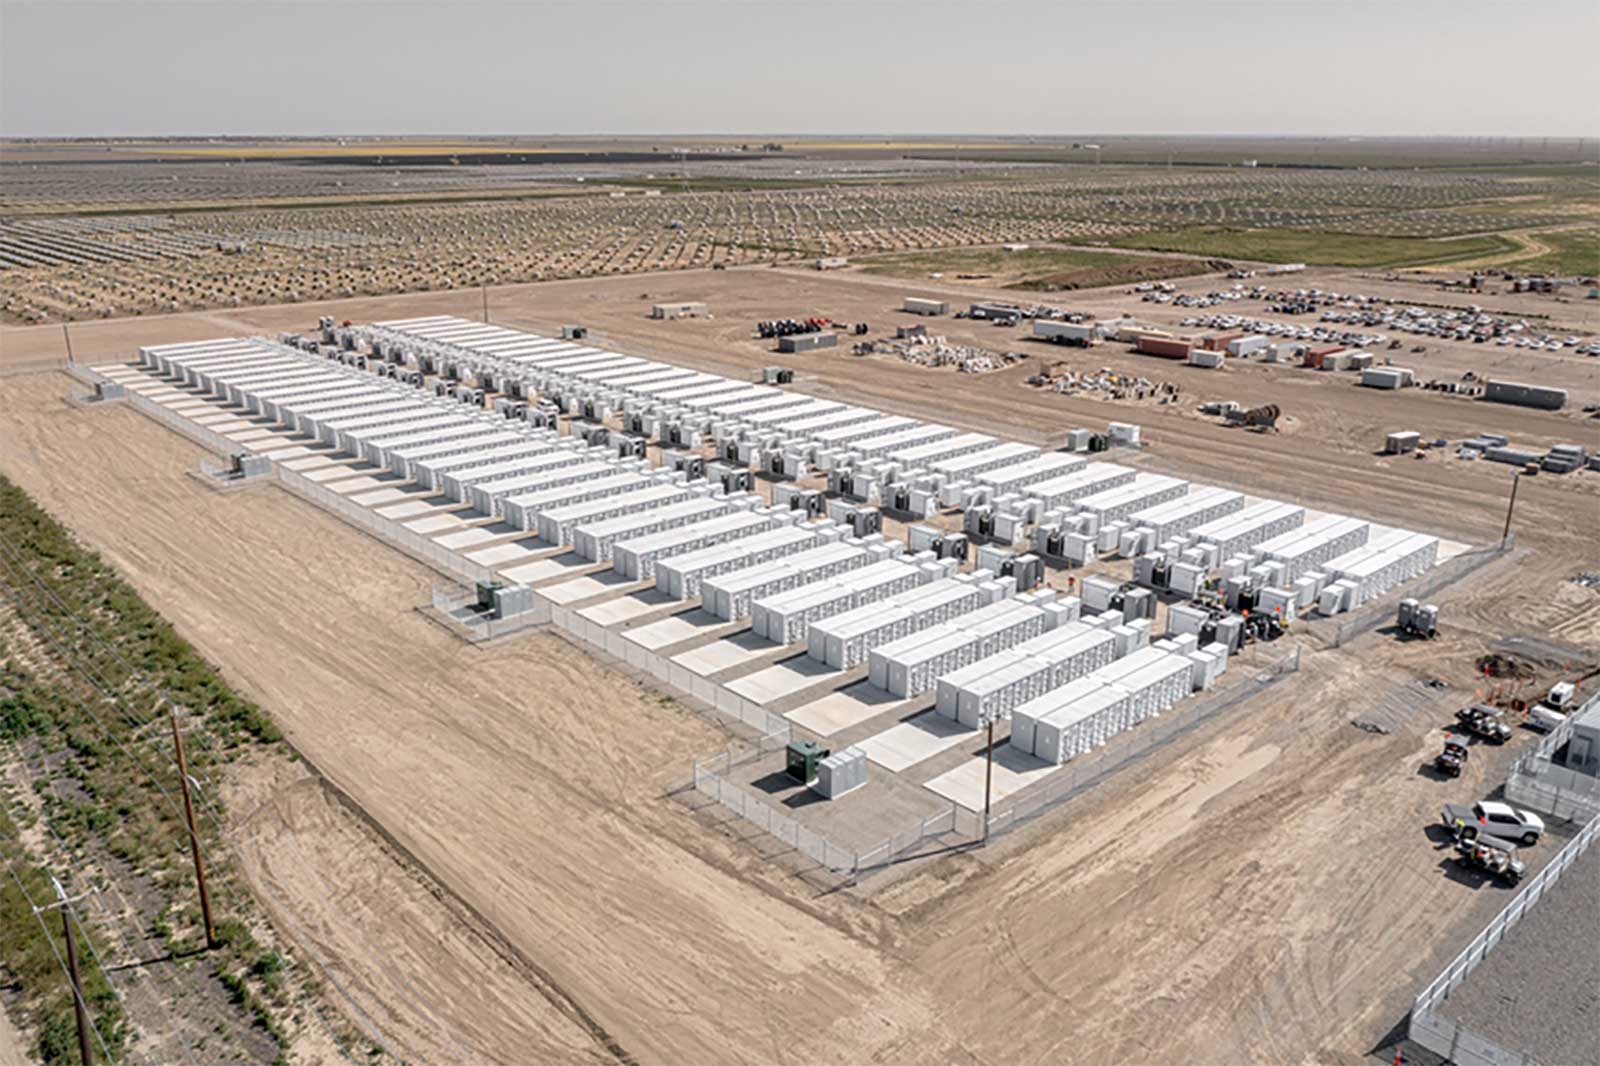 RWE connects its first utility-scale battery storage project to the  California grid